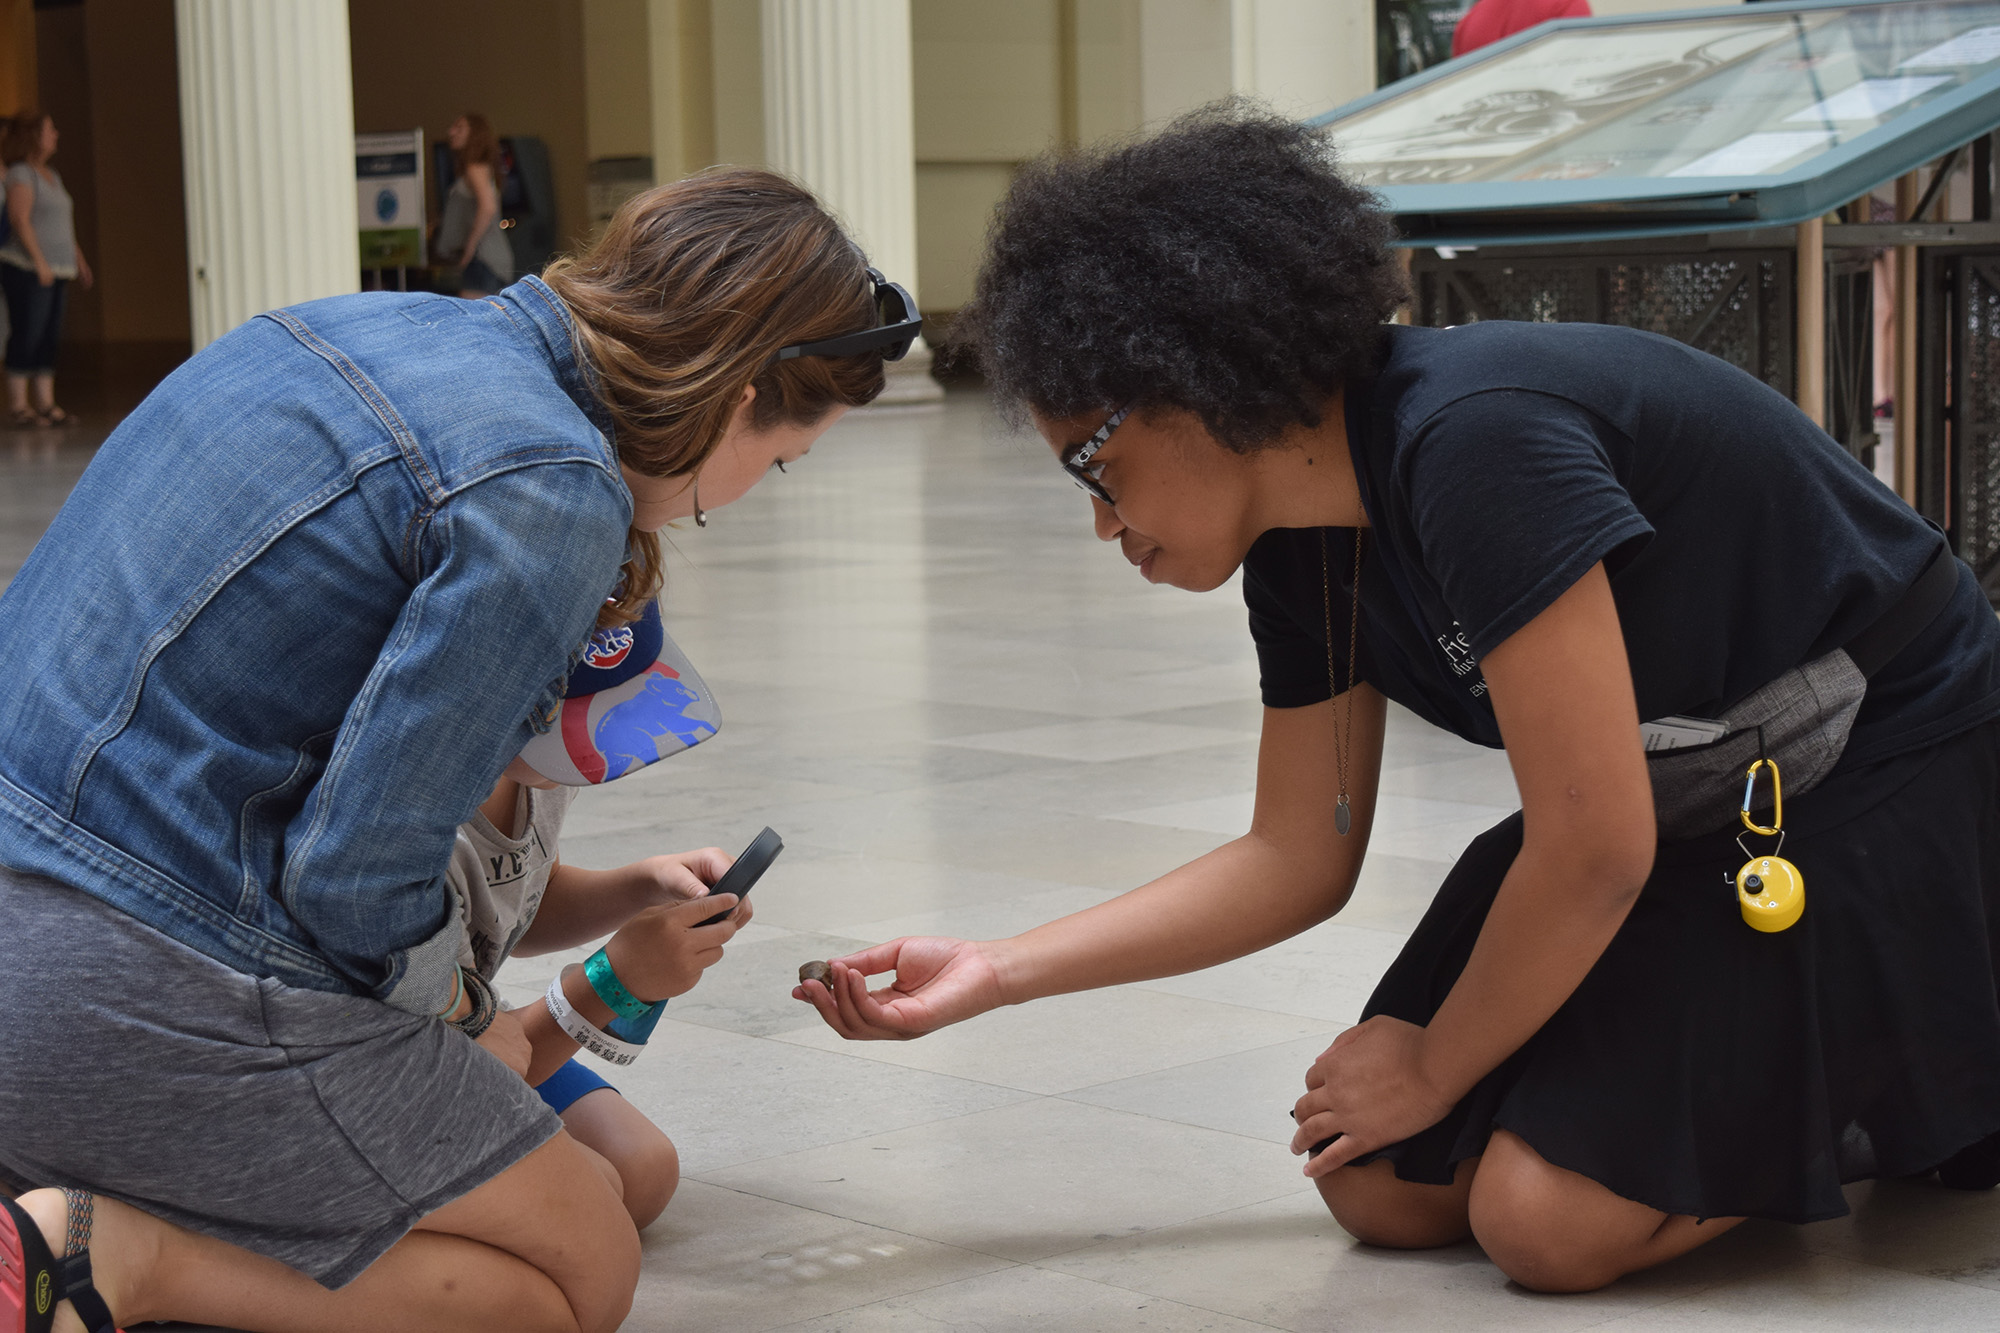 Two teens kneel on a tile floor next to a child. They are all looking at a small object one of the teens is holding out in her hand.